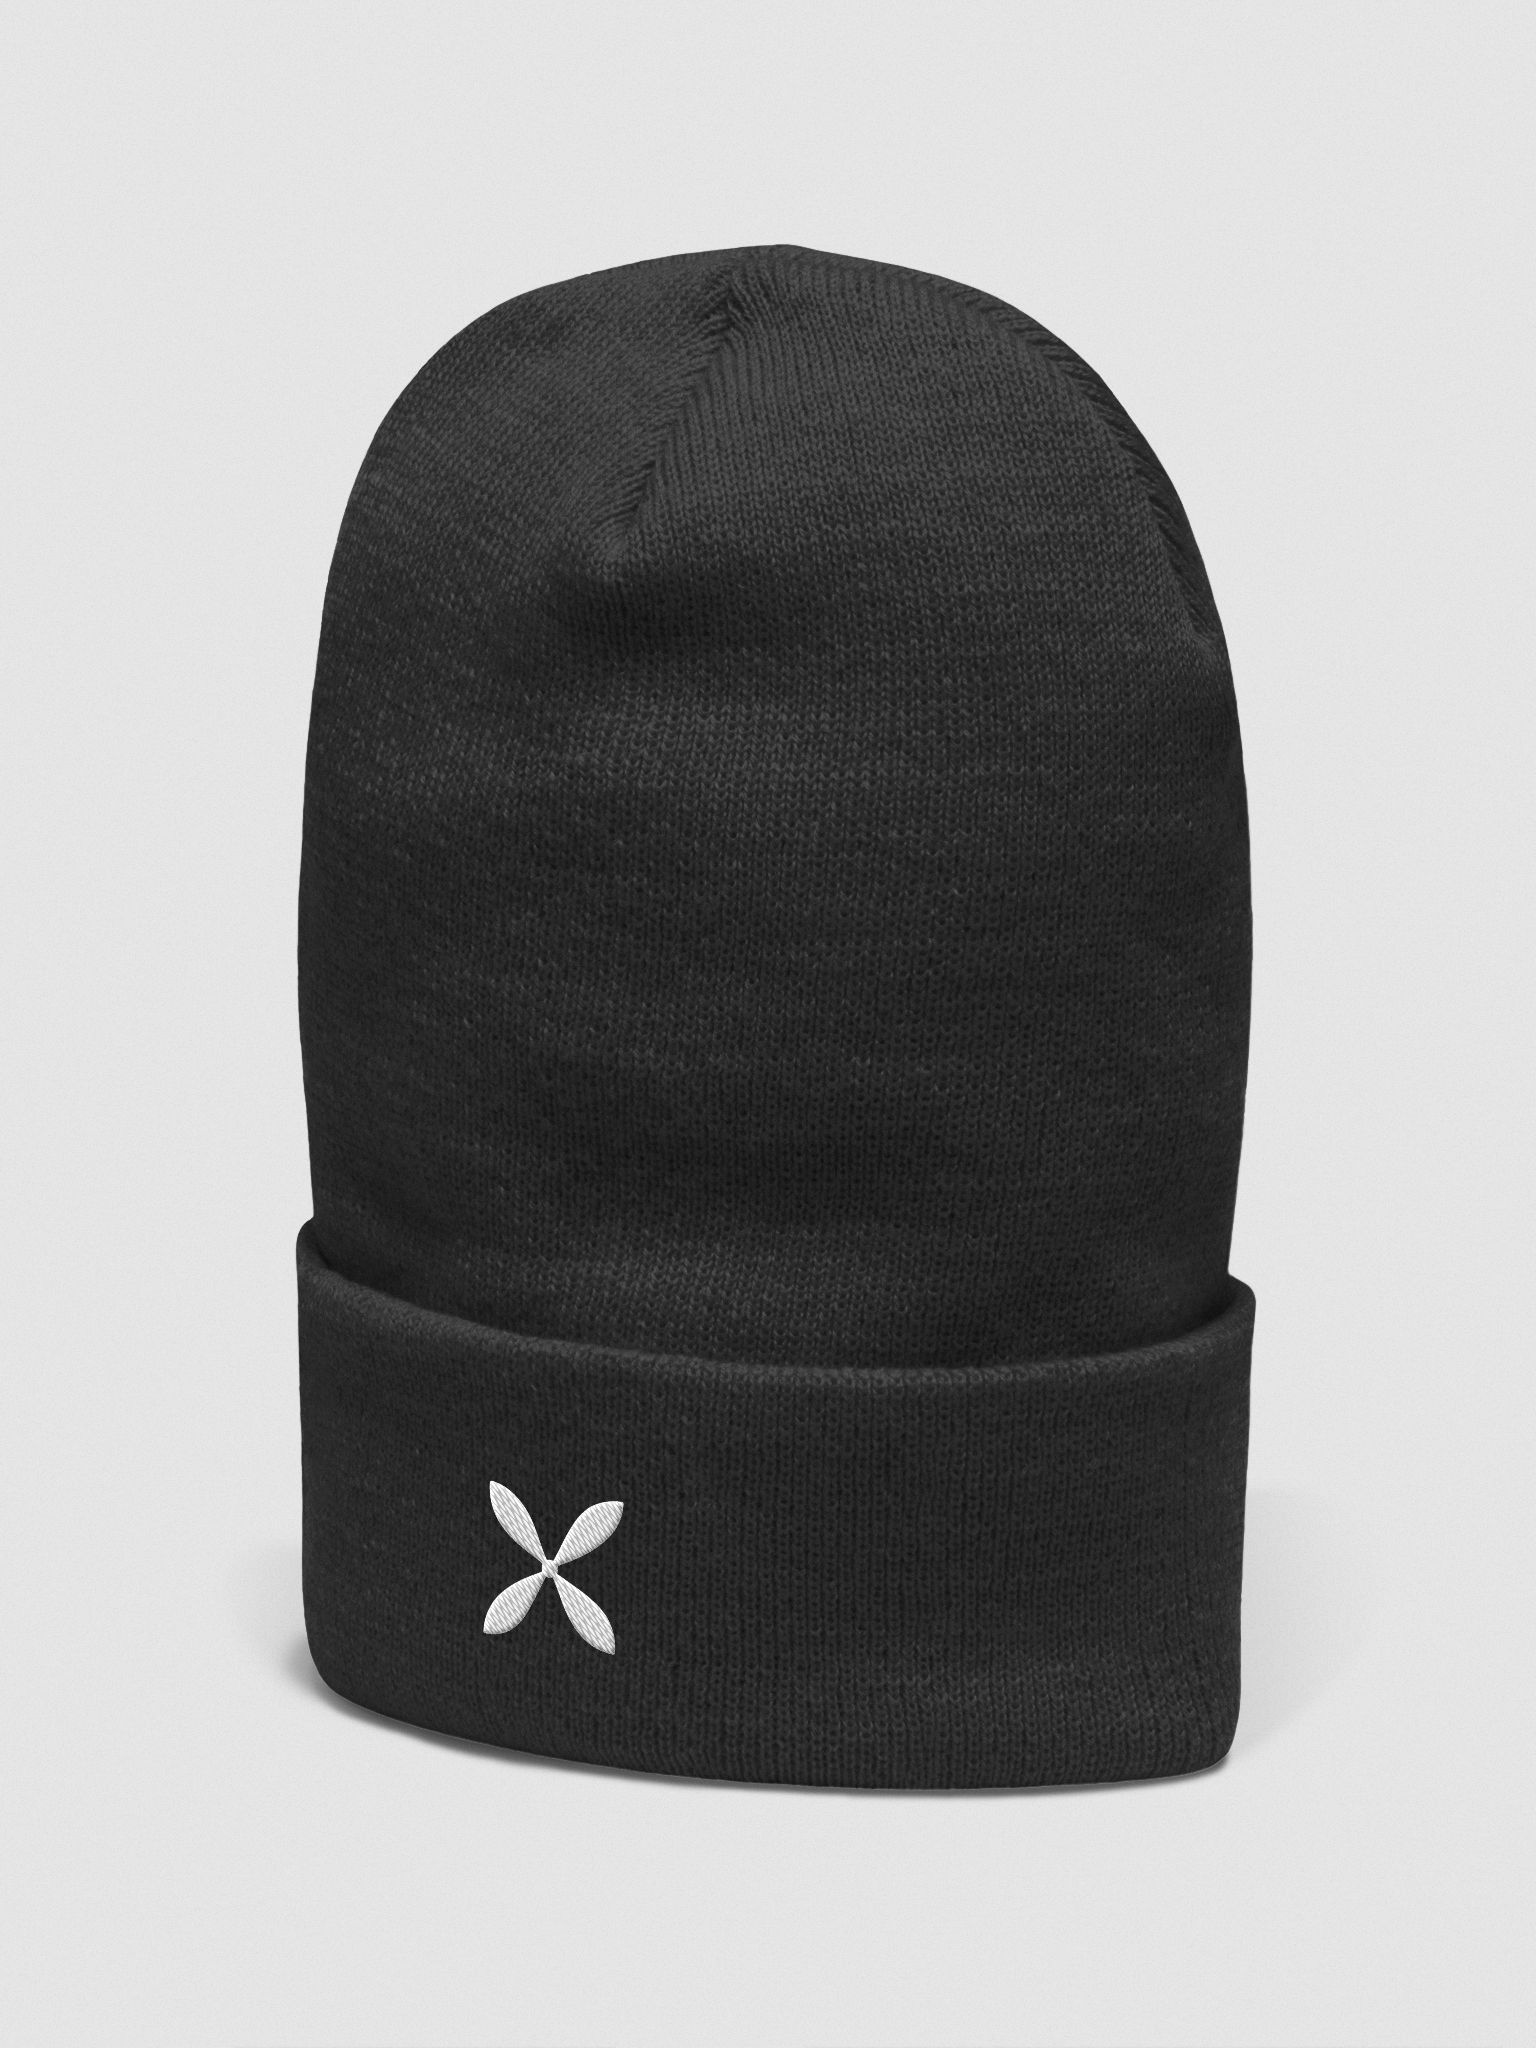 Kelli Copter Propeller Beanie (White Embroidery)